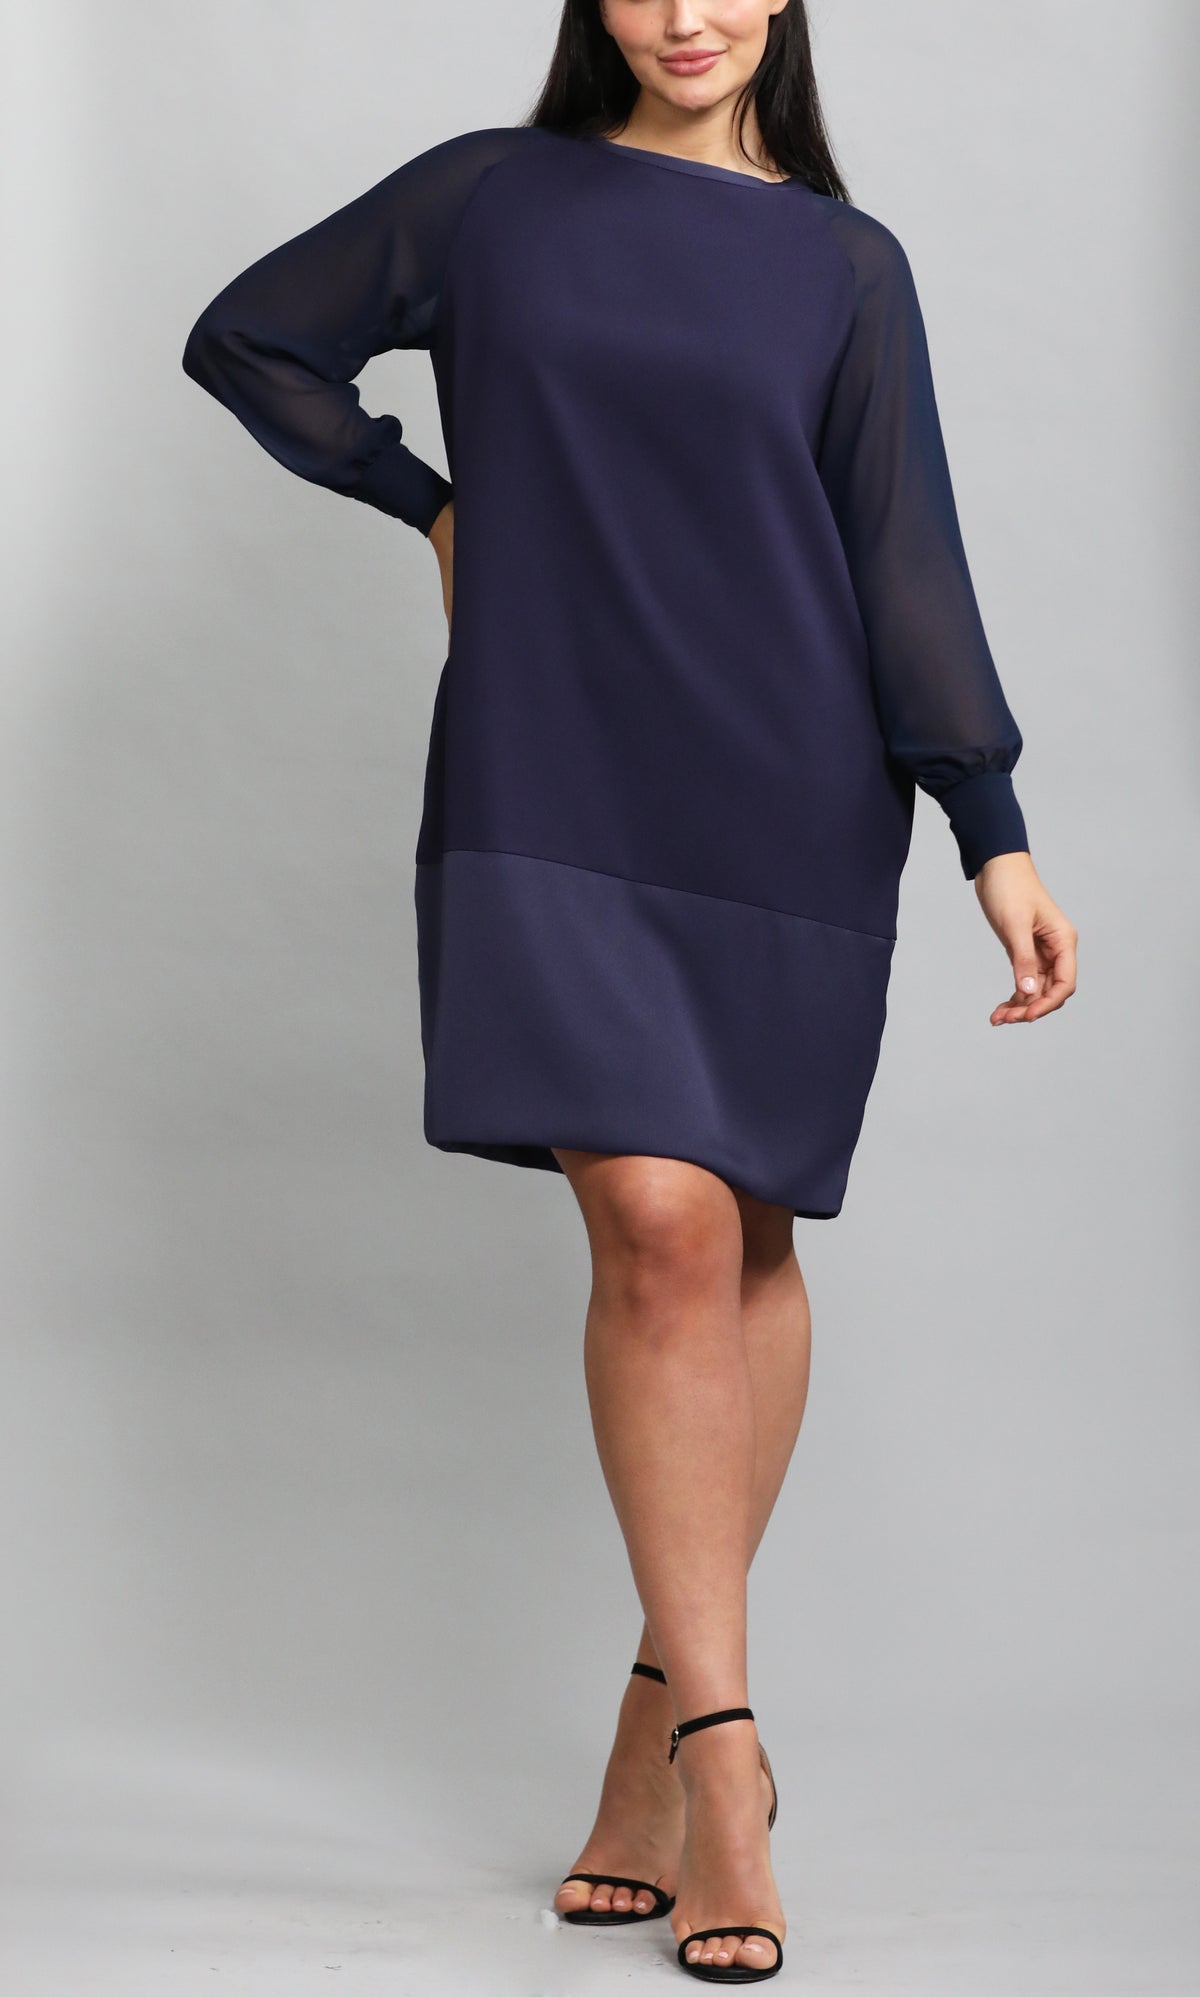 Navy Dress With Sheer Sleeves